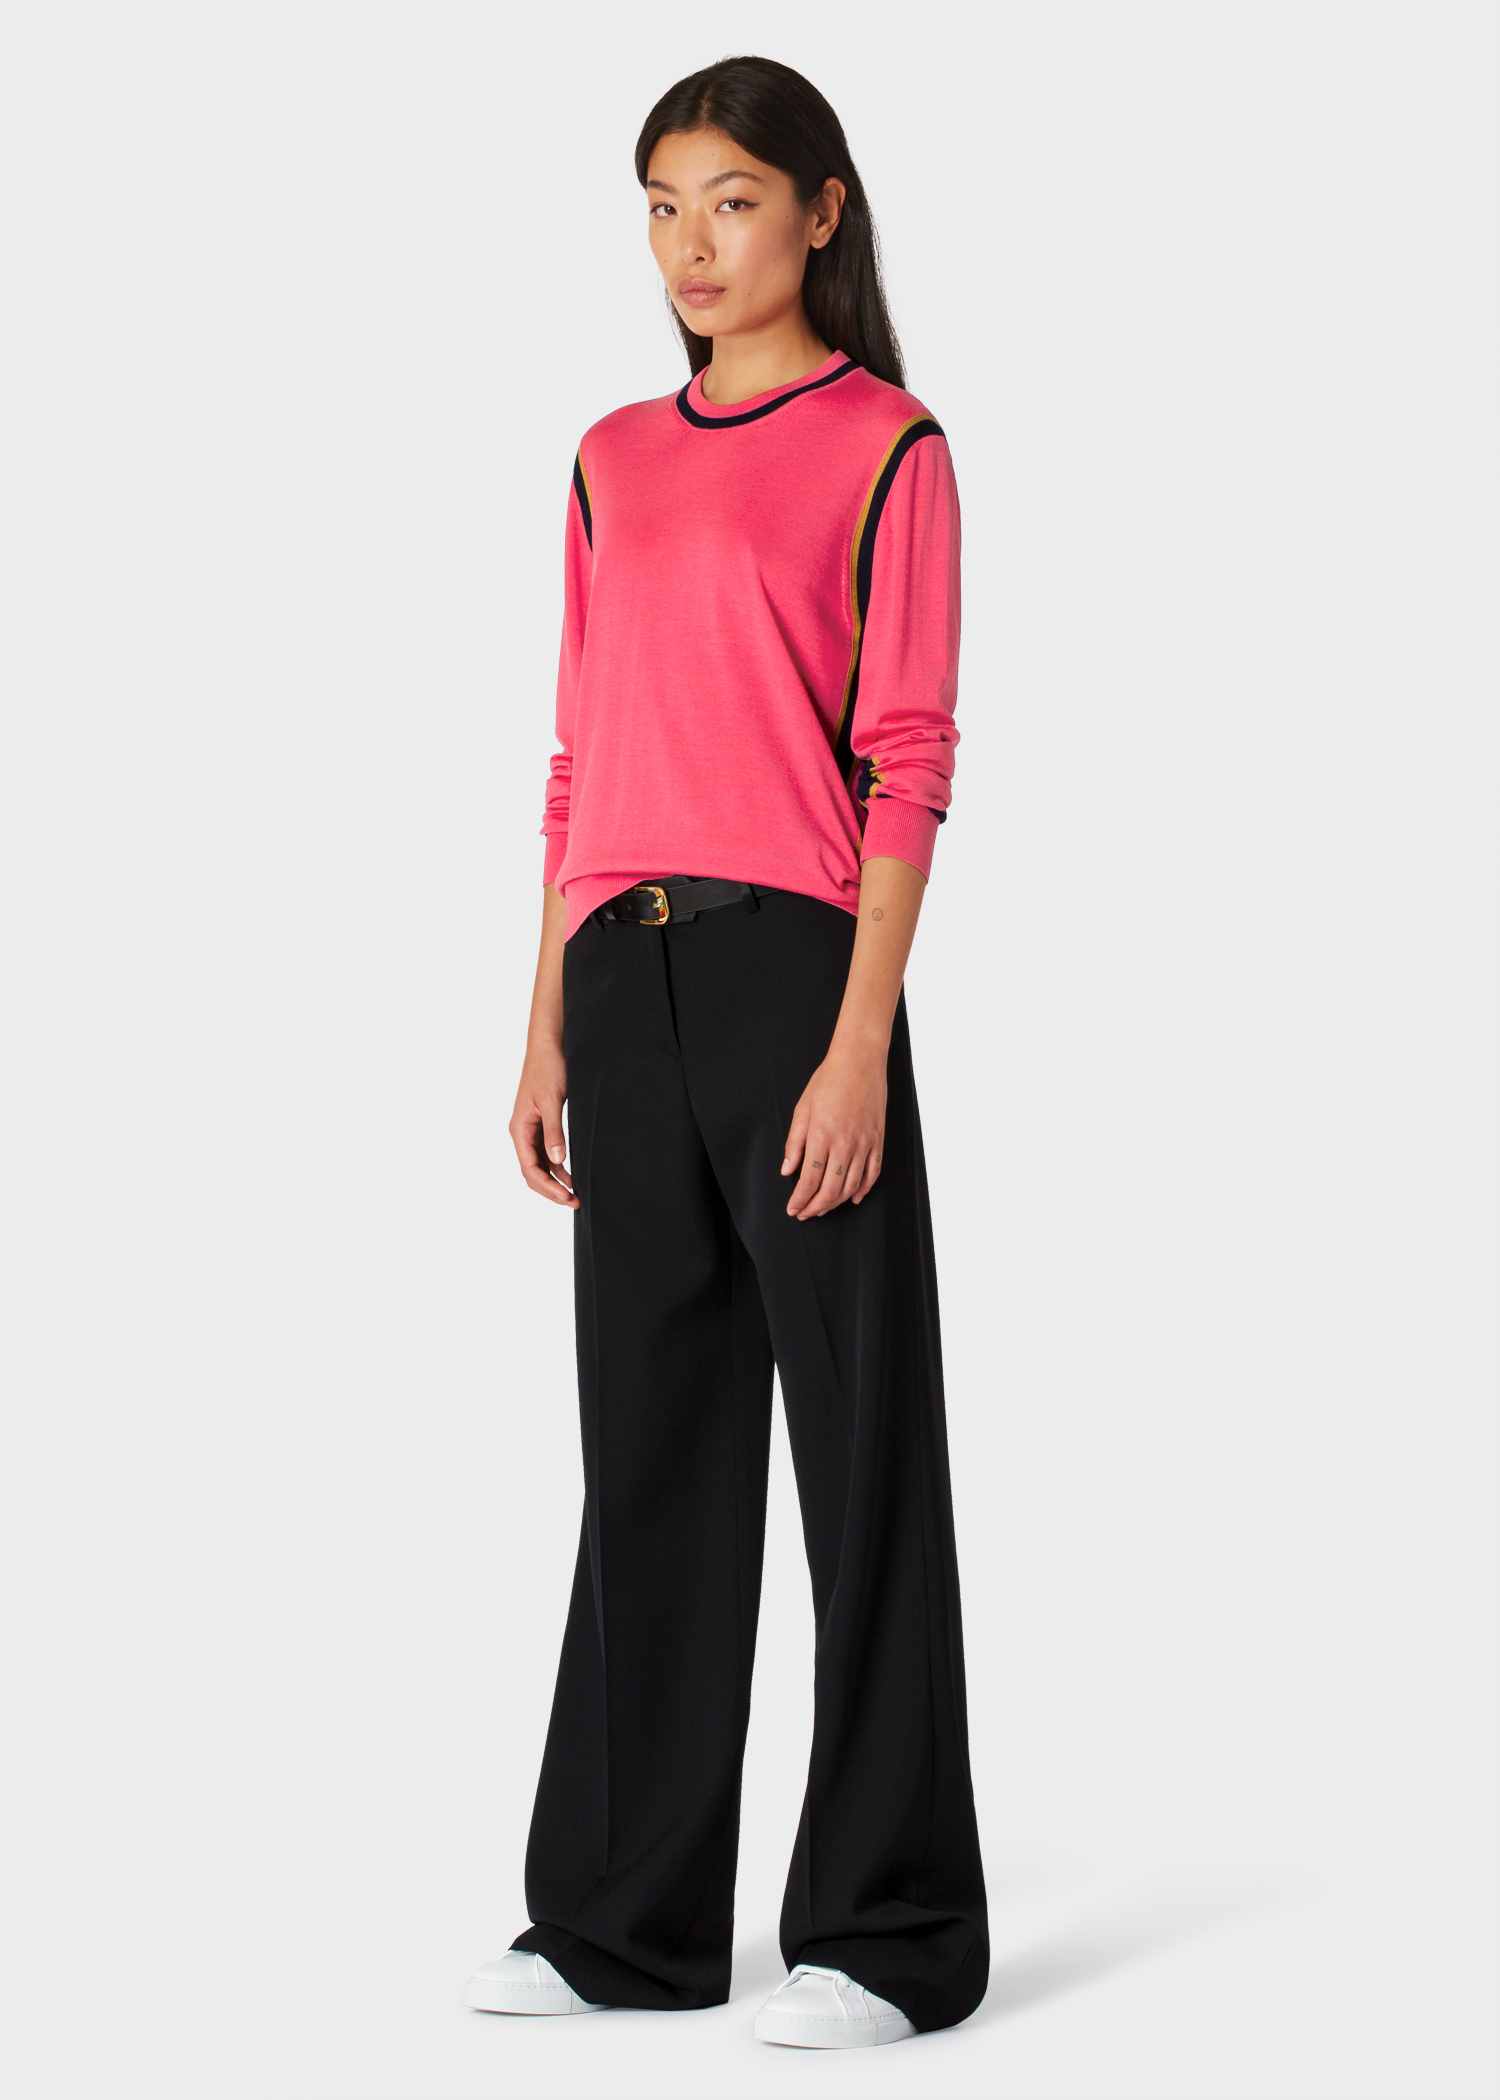 Model front View - Women's Pink Wool And Silk Sweater With Dark Navy Trims Paul Smith